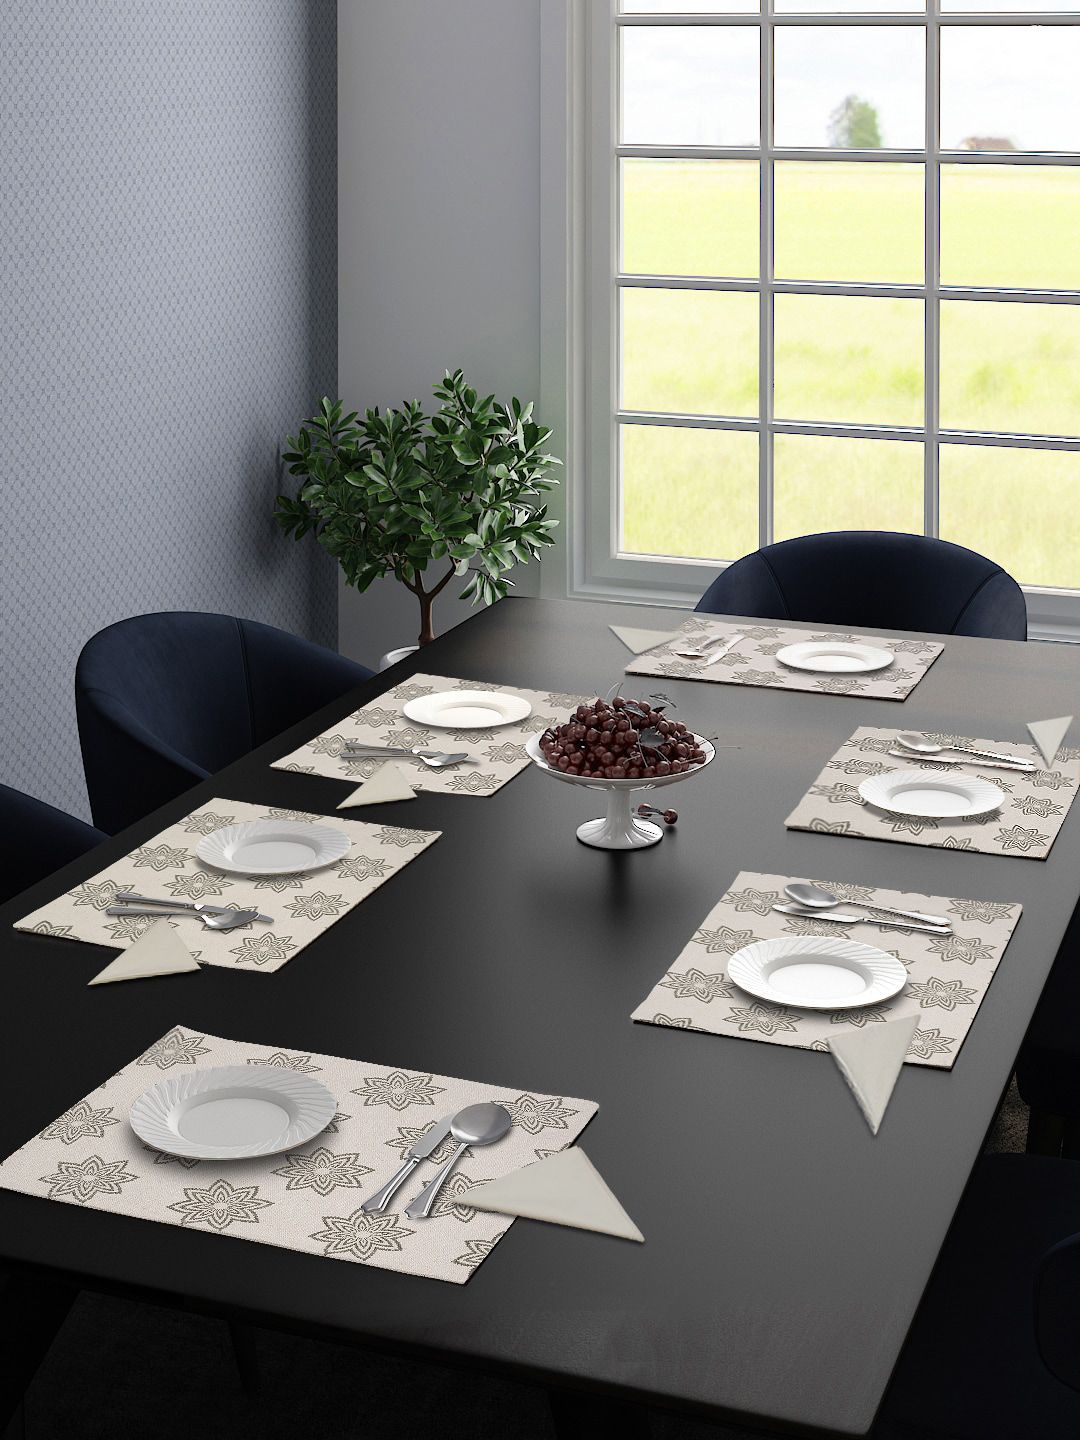 Saral Home Set Of 6 Beige & Olive Green Printed Table Placemats Price in India